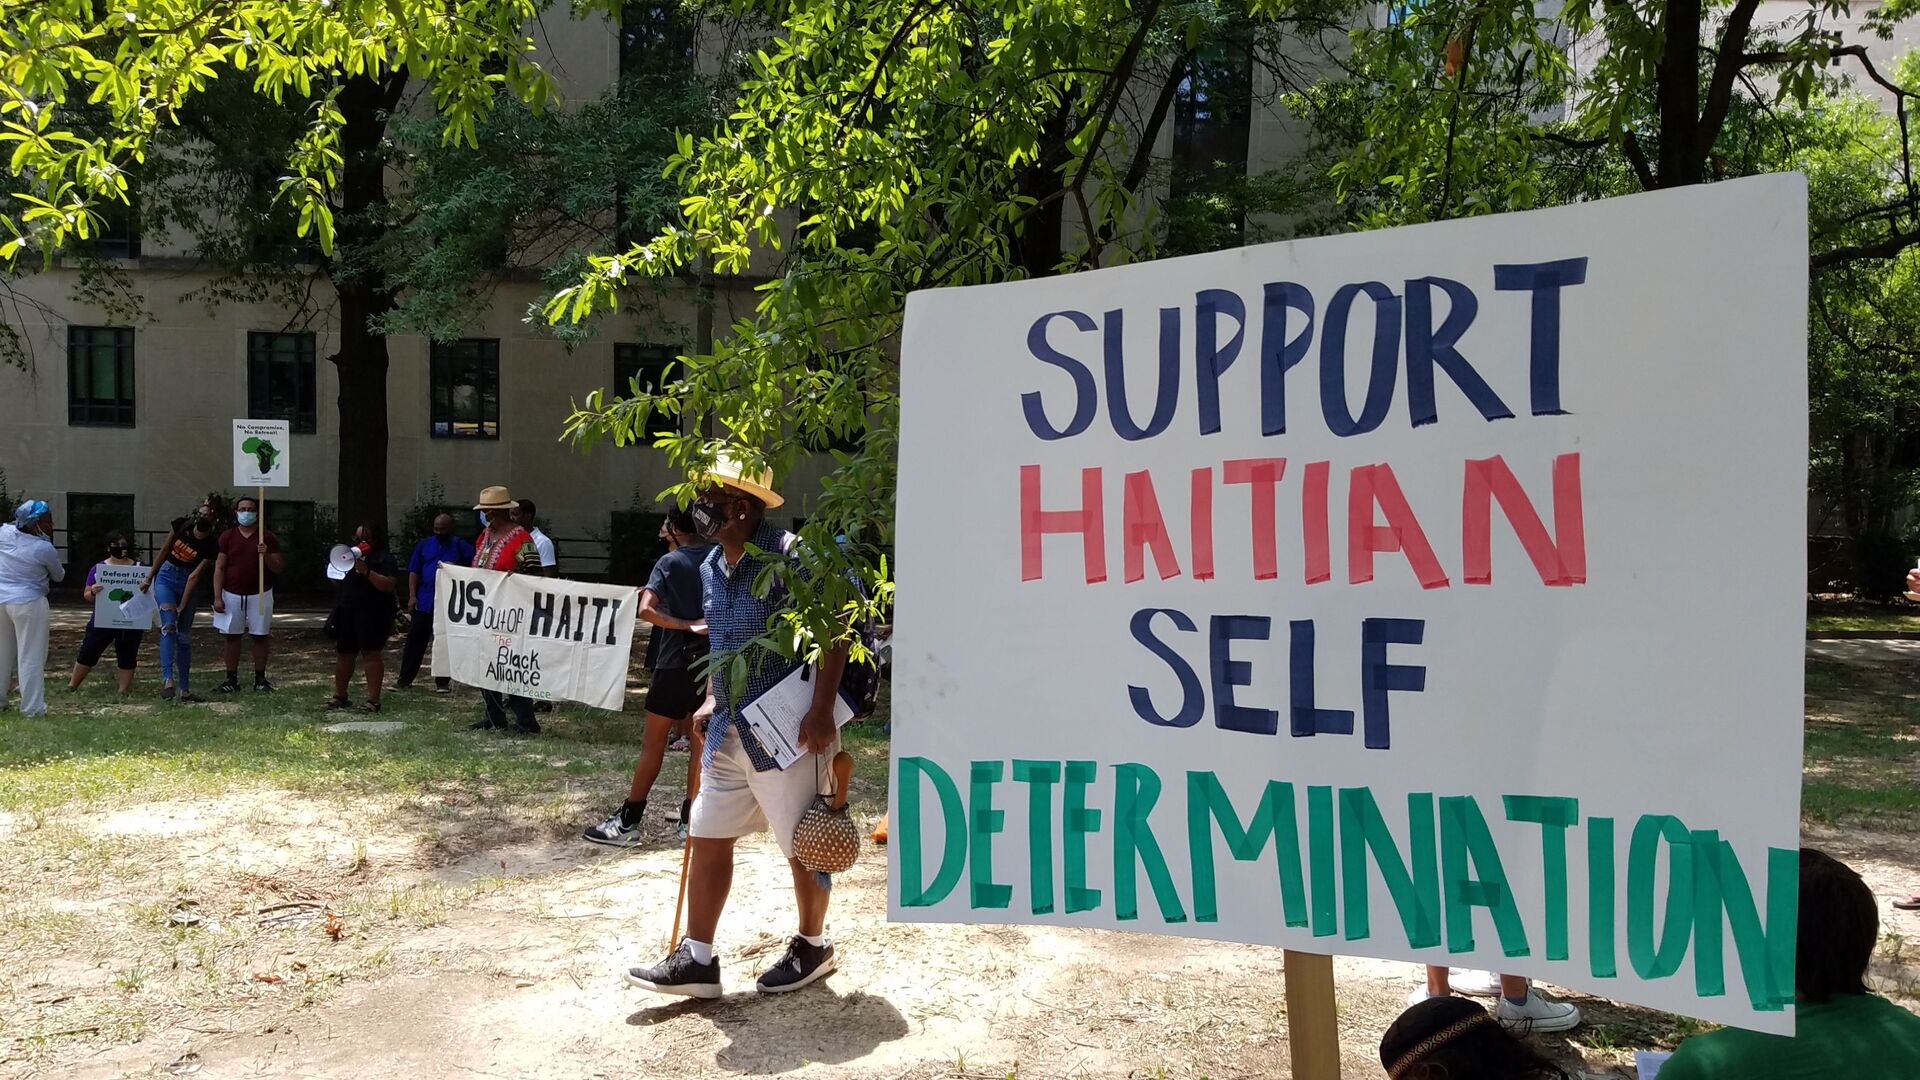 Activists rally outside the US State Department against US involvement in Haiti, including the potential deployment of US troops after the assassination of Haitian President Jovenel Moise - Sputnik International, 1920, 15.07.2021